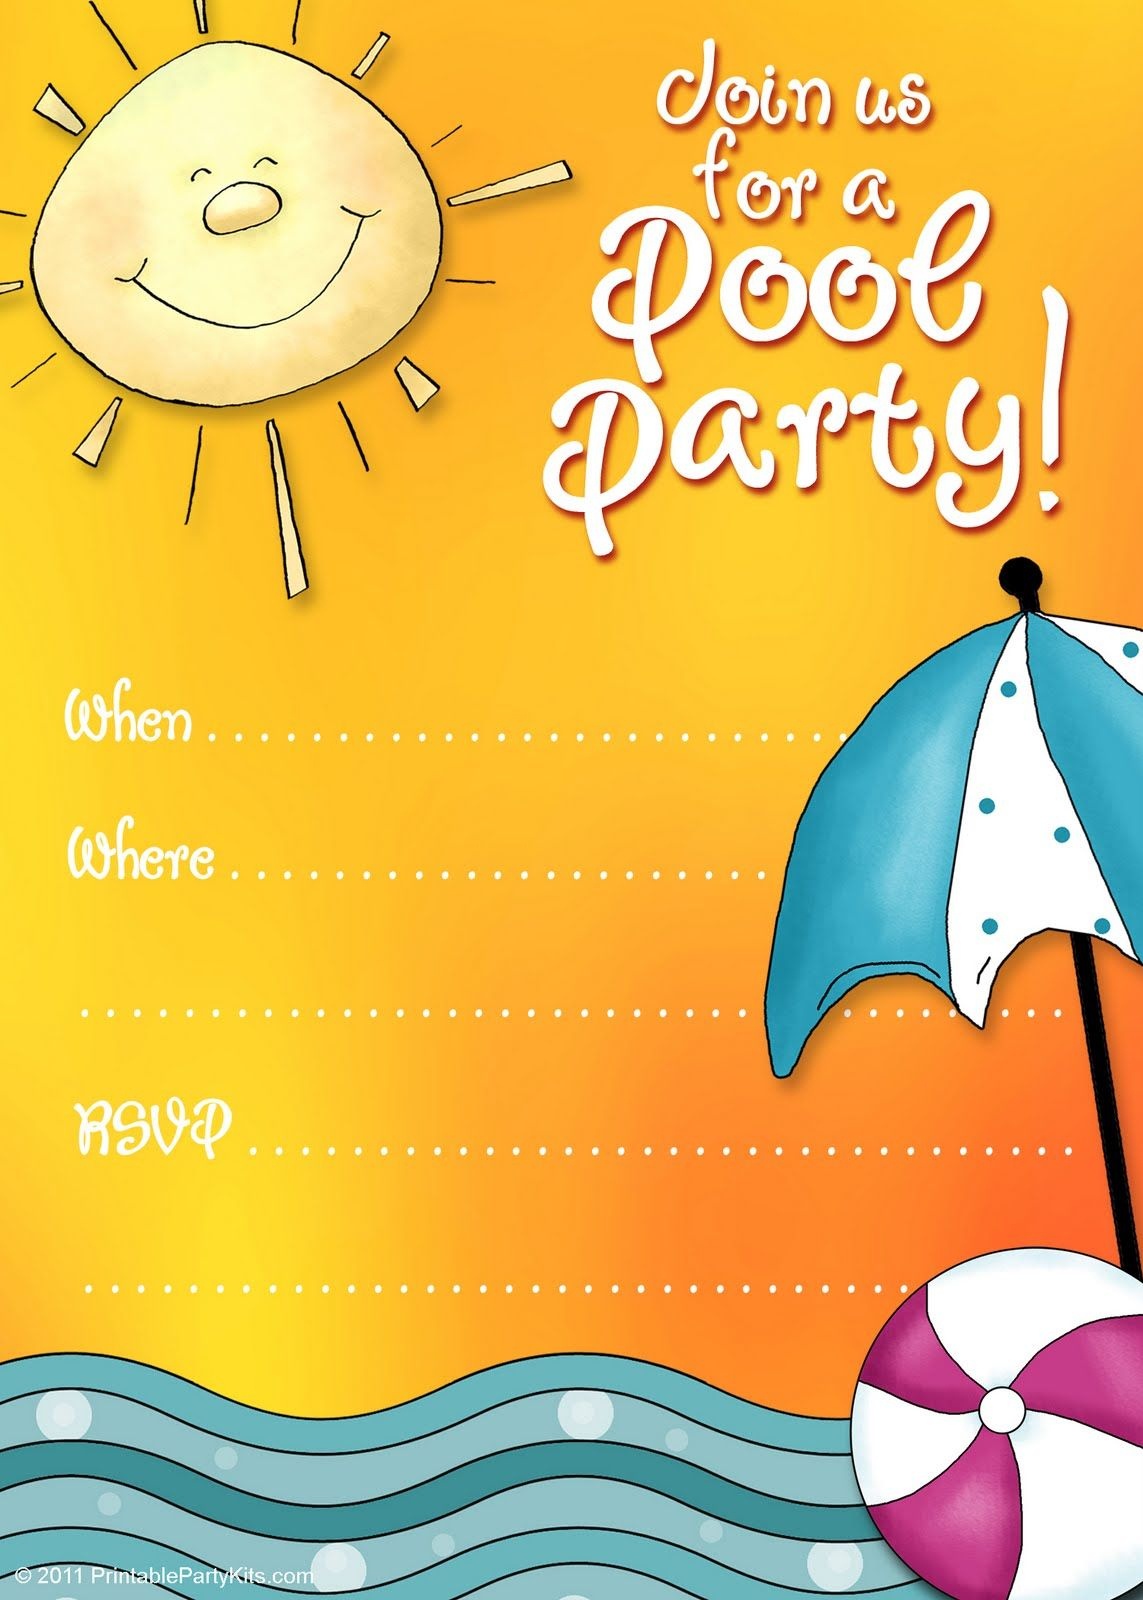 Free Printable Party Invitations: Summer Pool Party Invites | Adhd - Free Printable Pool Party Invitation Cards